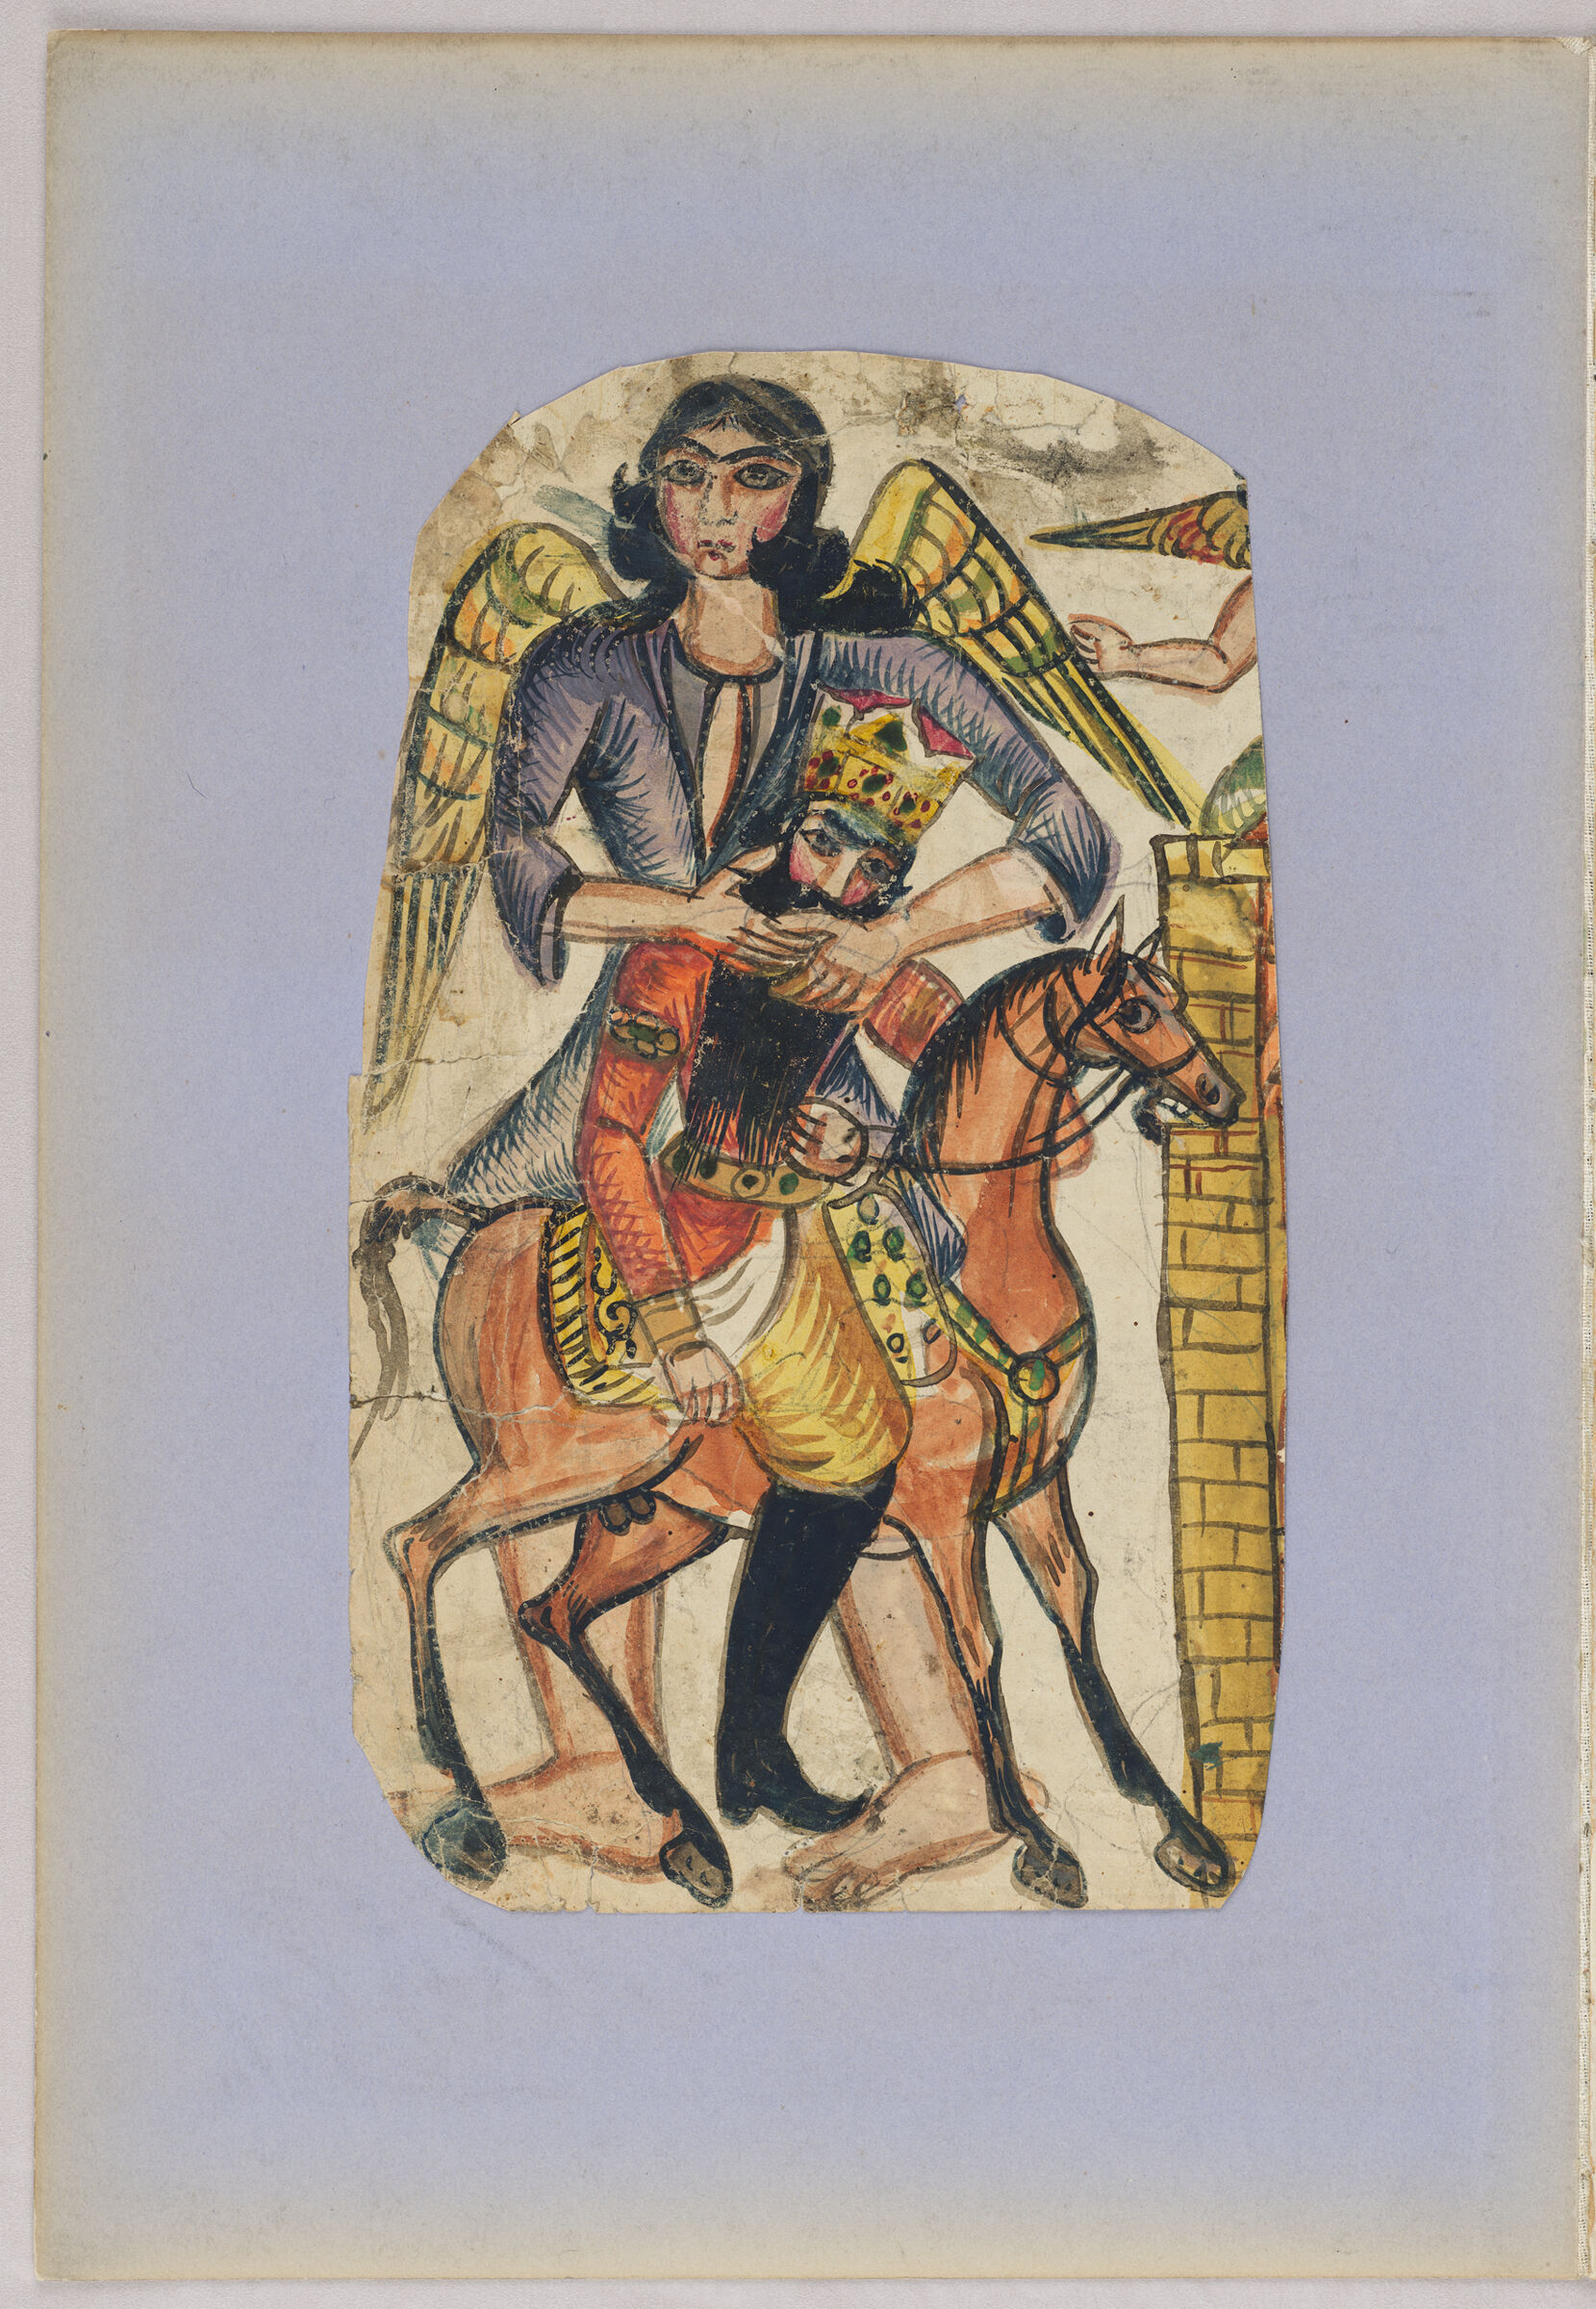 Folio 52 From An Album Of Drawings And Paintings: King On Horseback Embraced By Angel (Recto); Bust Portrait Of A Young Woman, Probably Pourandokht, With Tiara And Headscarves (Verso)